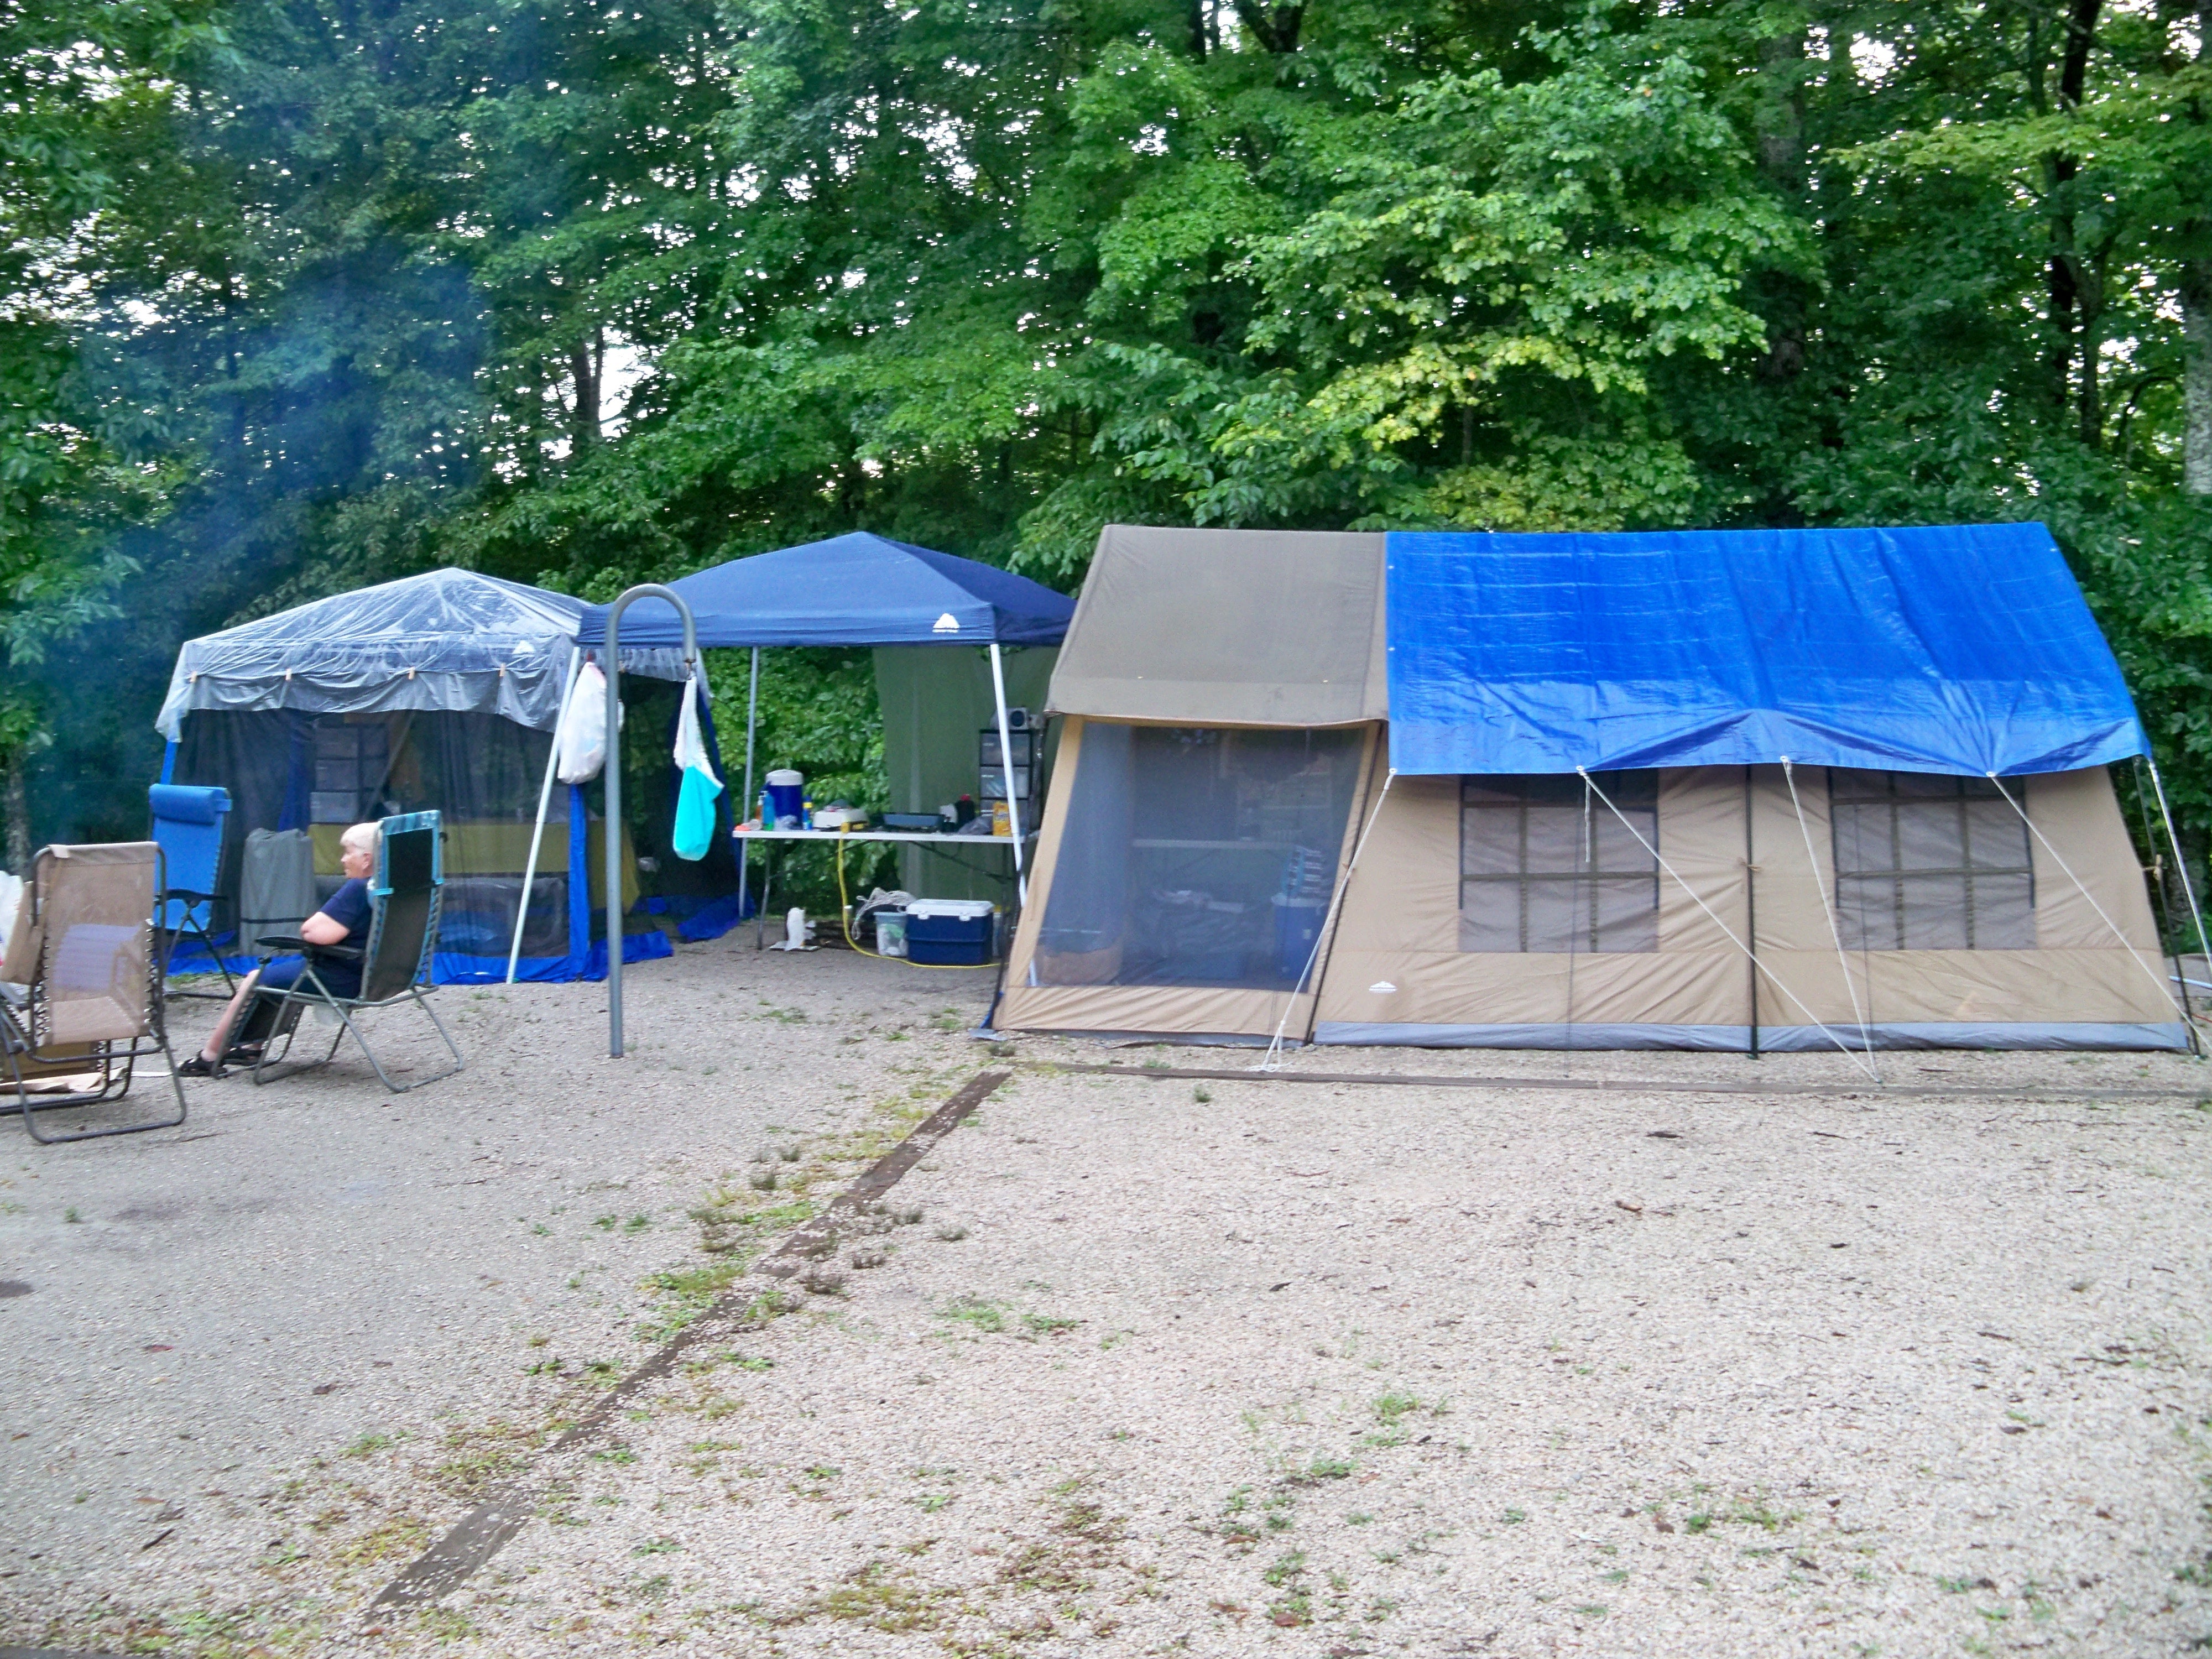 Tent city on site 15